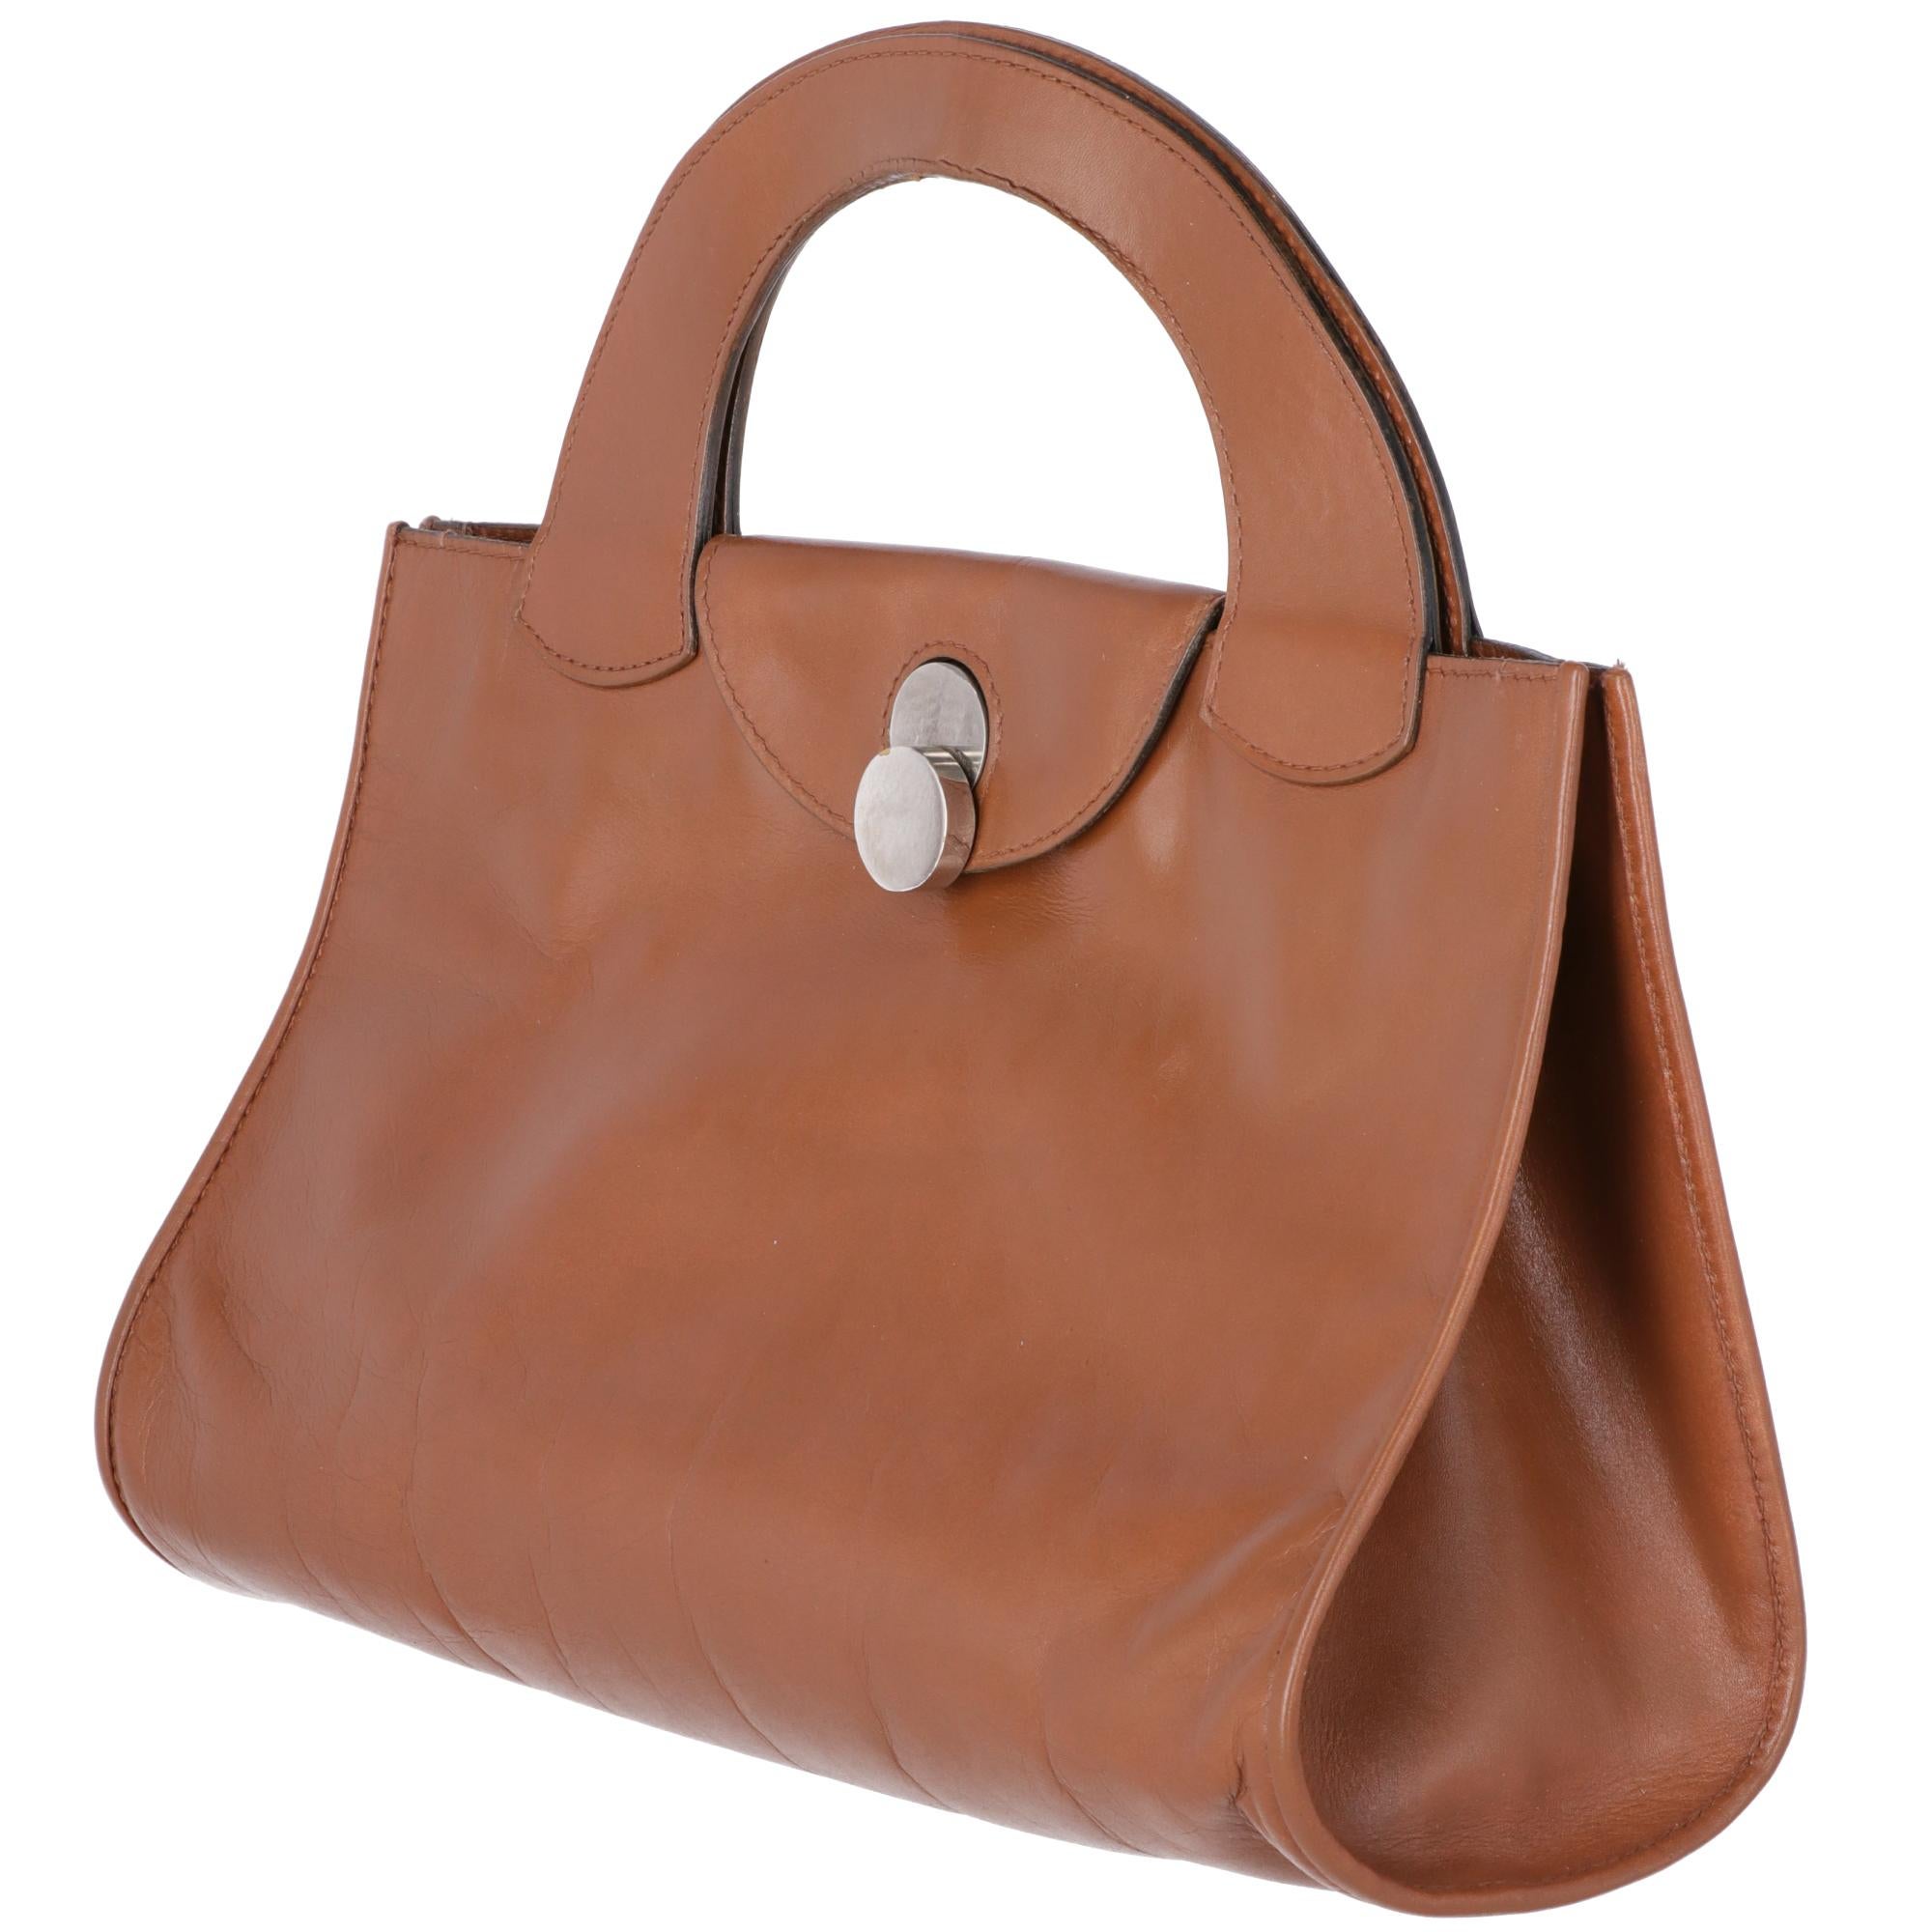 Gherardini brown leather hand bag with leather flap and metal rolling closure. Leather lining with two patch pockets, one opened and the other one with zip.

The bag has slight signs of use on the metal details, wrinkles on the leather and internal